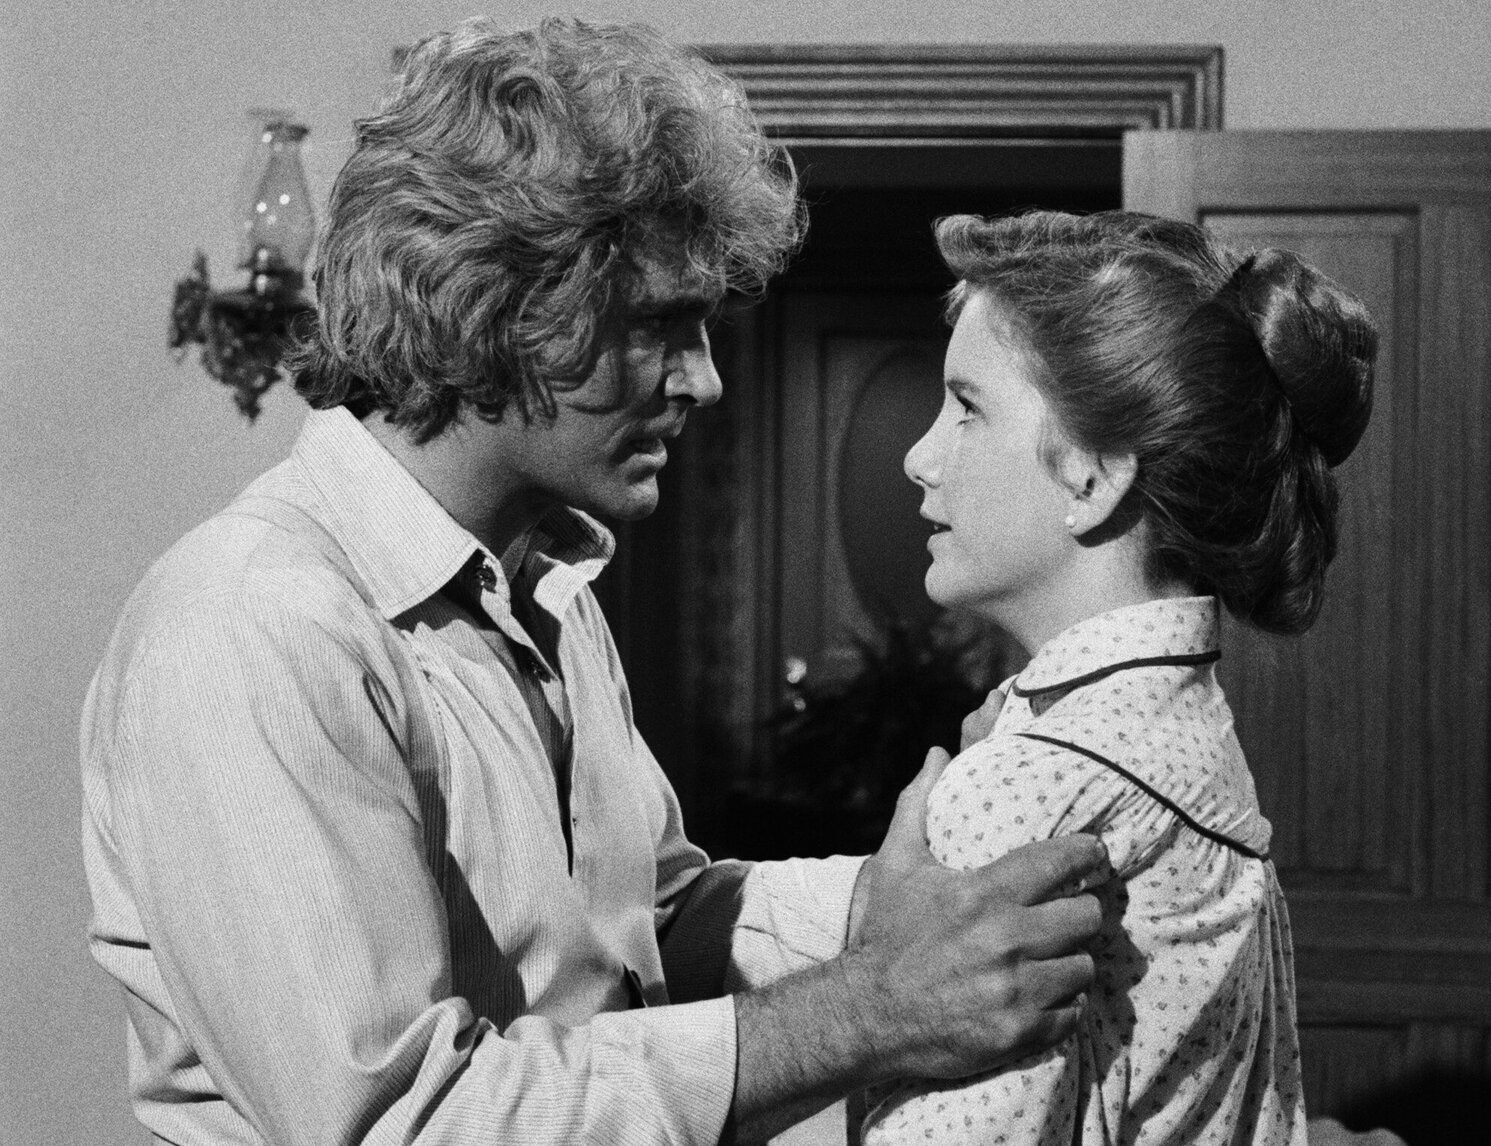 Michael Landon grabbing Melissa Gilbert by the shoulders in a still from 'Little House: A New Beginning'